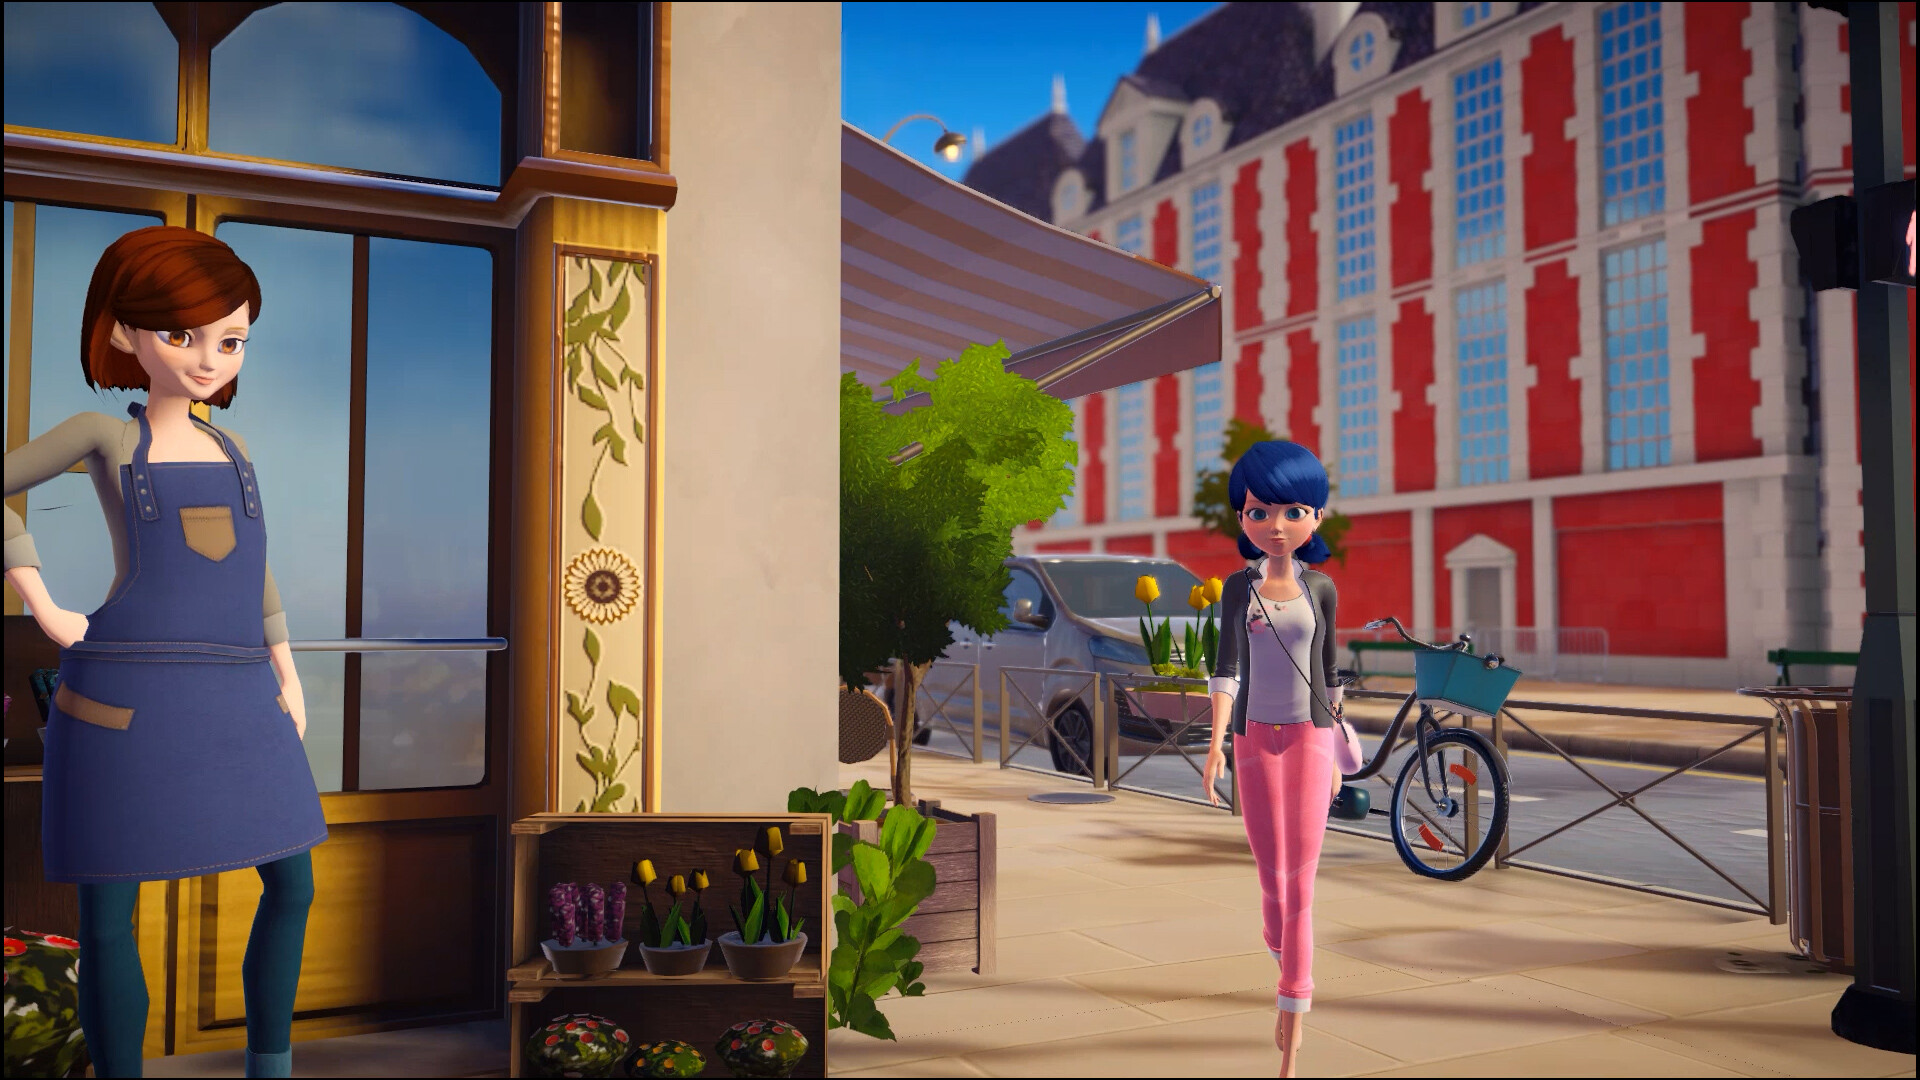 Miraculous: Rise of the Sphinx Free Download